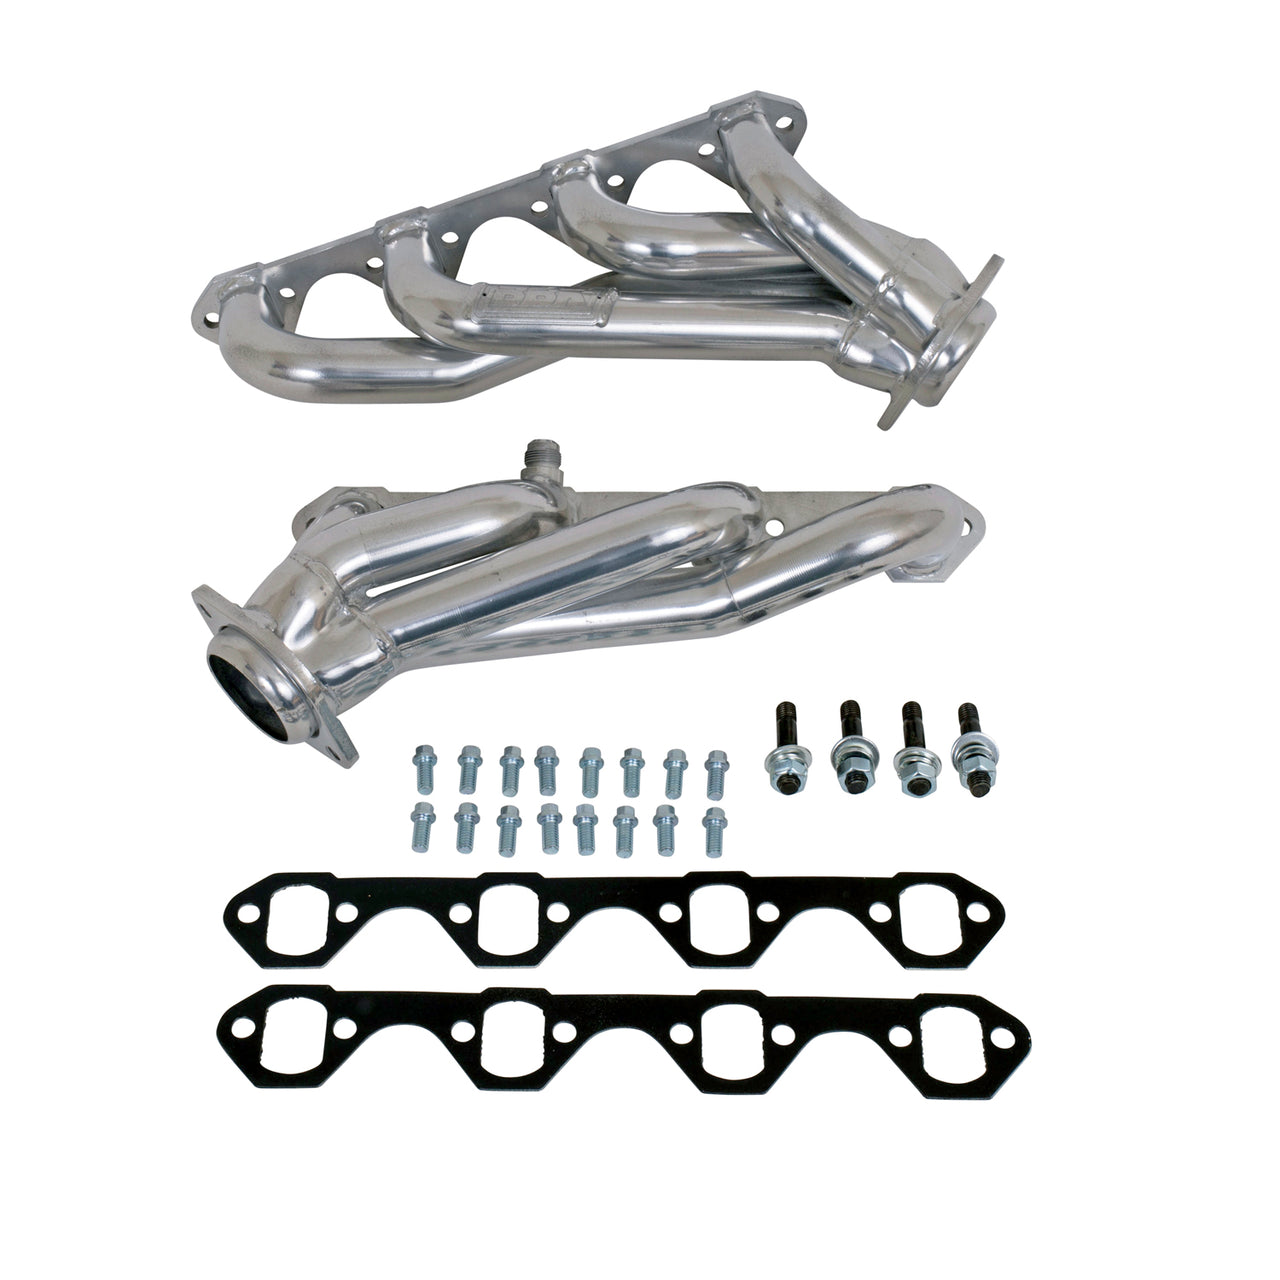 1994-1995 MUSTANG 5.0L 1-5/8 SHORTY HEADERS (POLISHED SILVER CERAMIC)